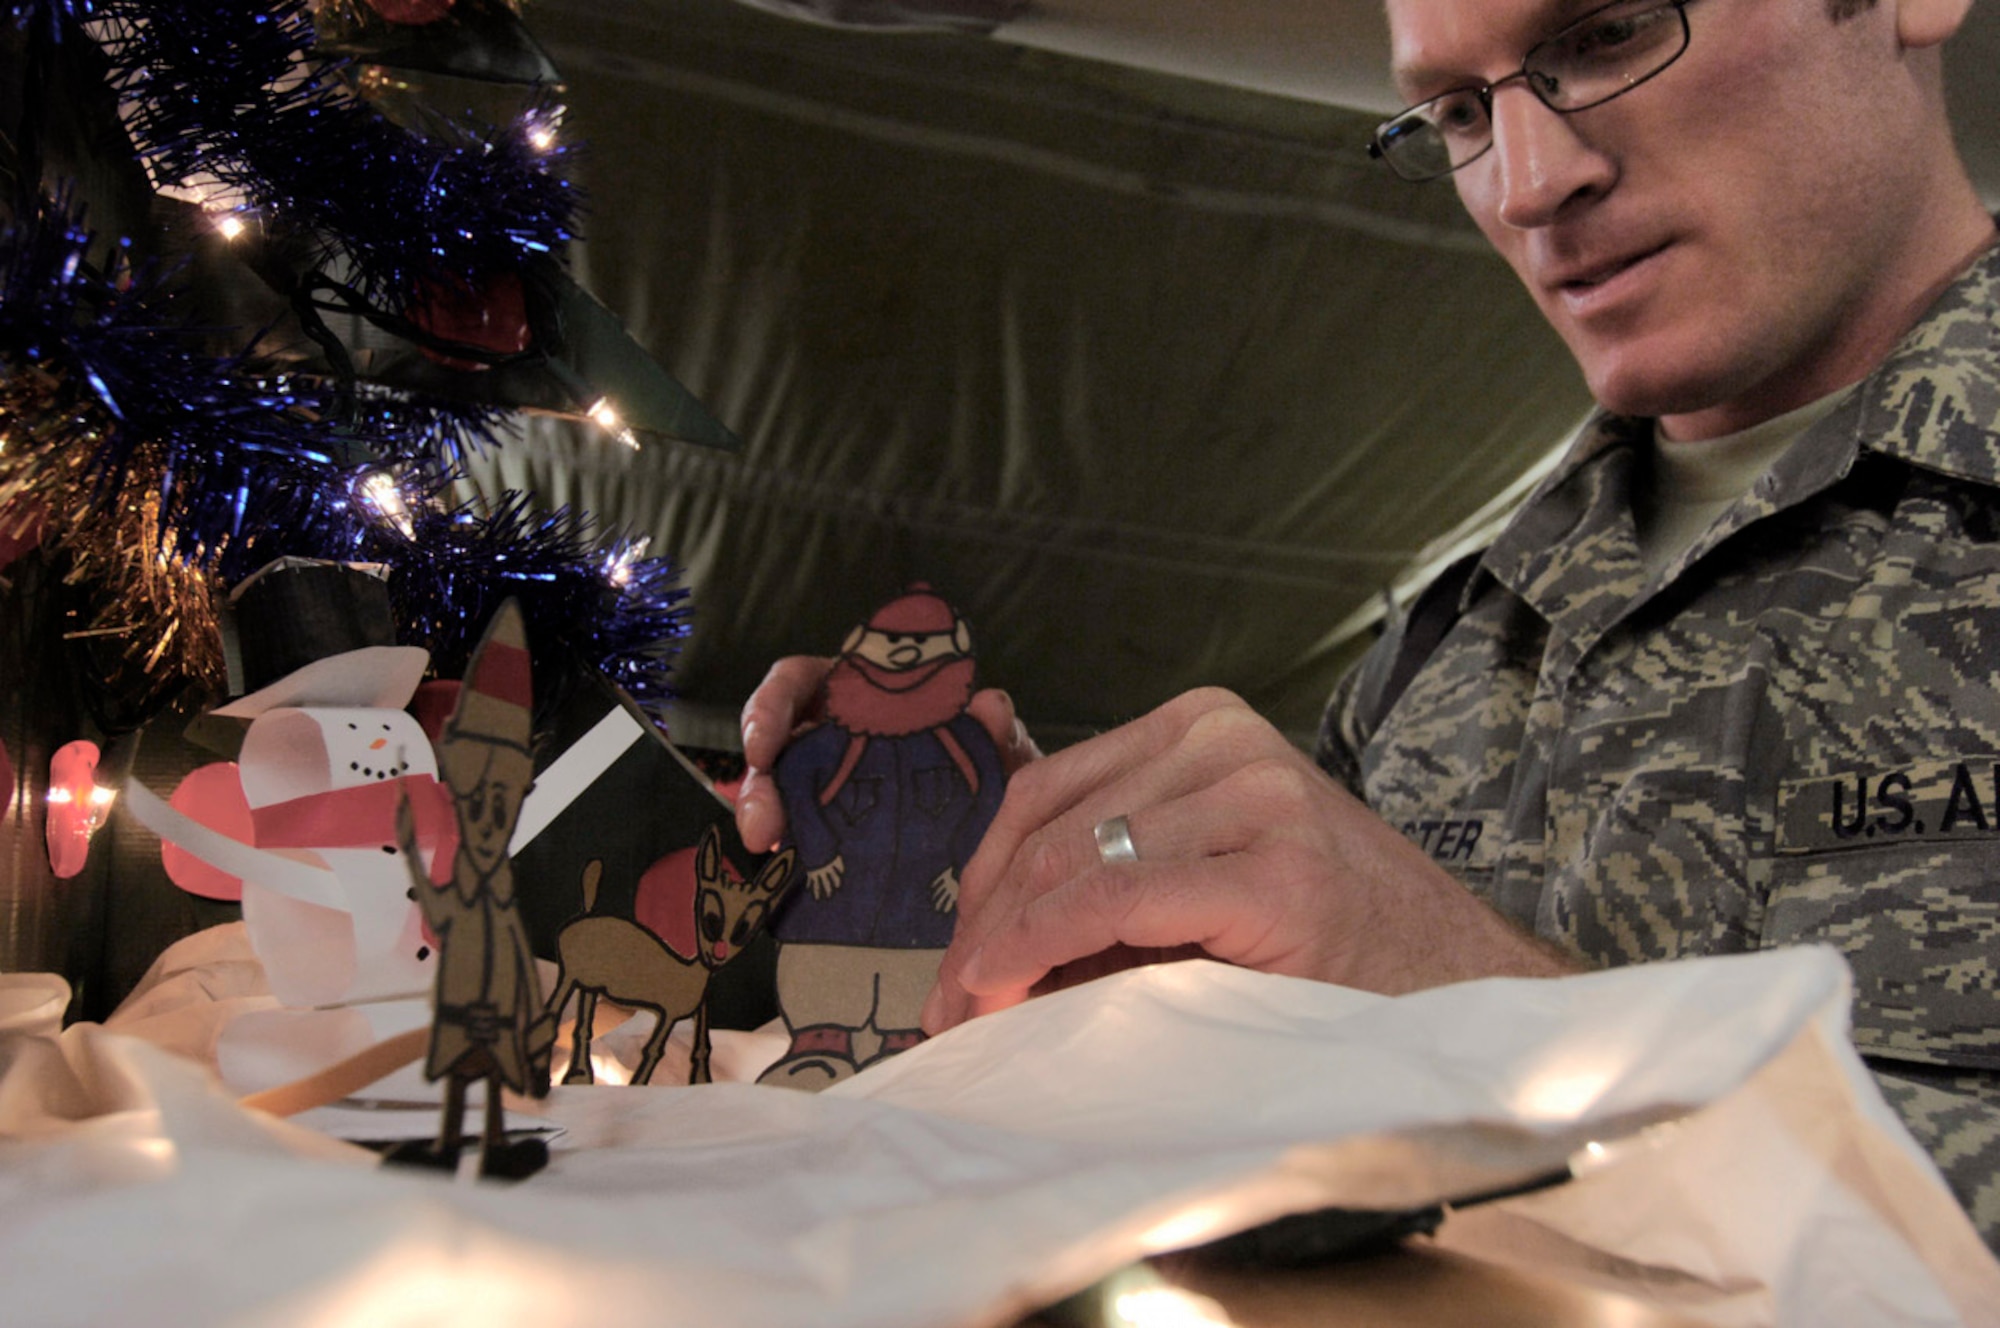 Tech. Sgt. Ryan McMaster places cartoon characters in a holiday diorama next to a tree Dec. 14 at Bagram Air Base, Afghanistan. He created both from locally-procured materials. Sergeant McMaster is an aircrew life support technician with the 774th Expeditionary Airlift Squadron. (U.S. Air Force photo/Staff Sgt. Joshua T. Jasper) 